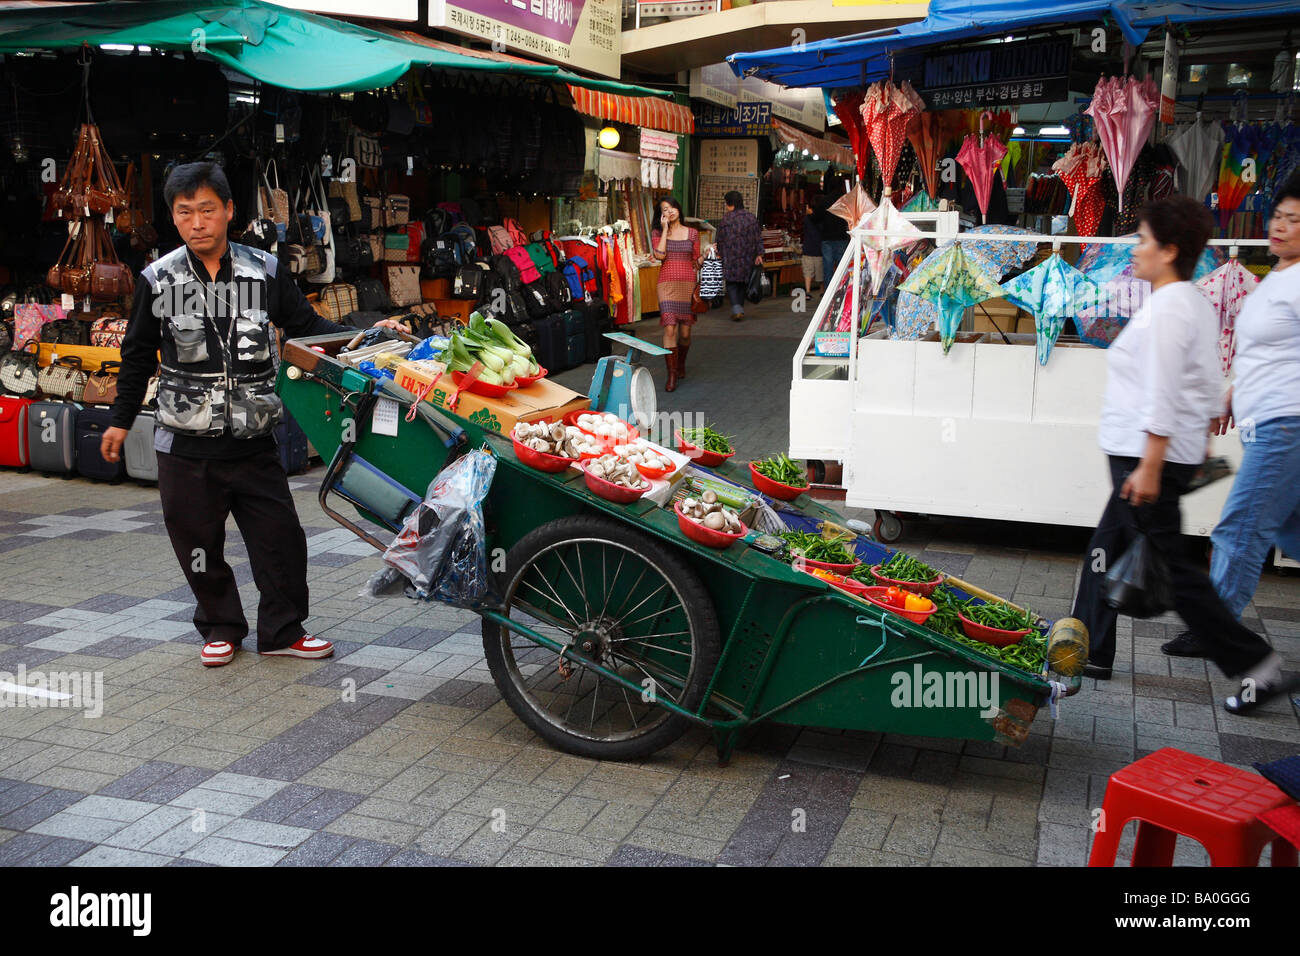 A merchant displaying his fresh produce for sale on a big cart on the middle of the street marketplace in the city of Busan Stock Photo